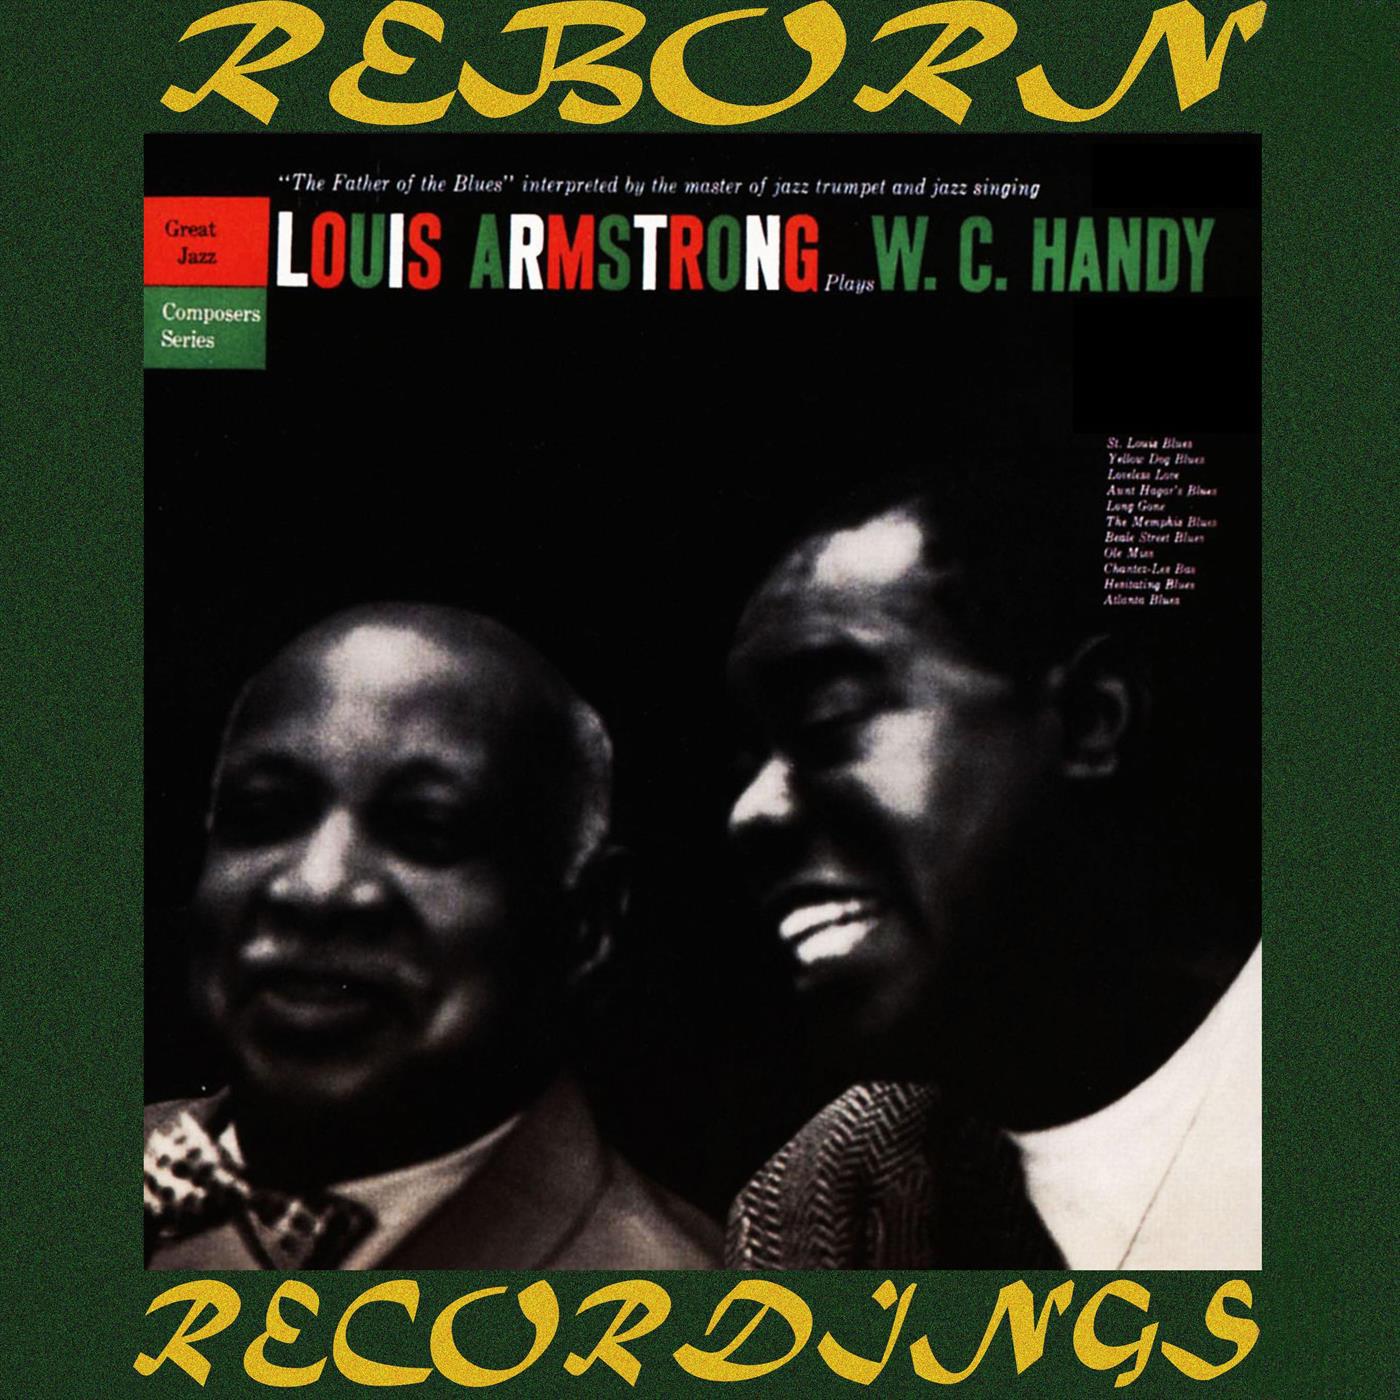 Louis Armstrong Plays W.C. Handy (Expanded, Great Jazz Composers, HD Remastered)专辑